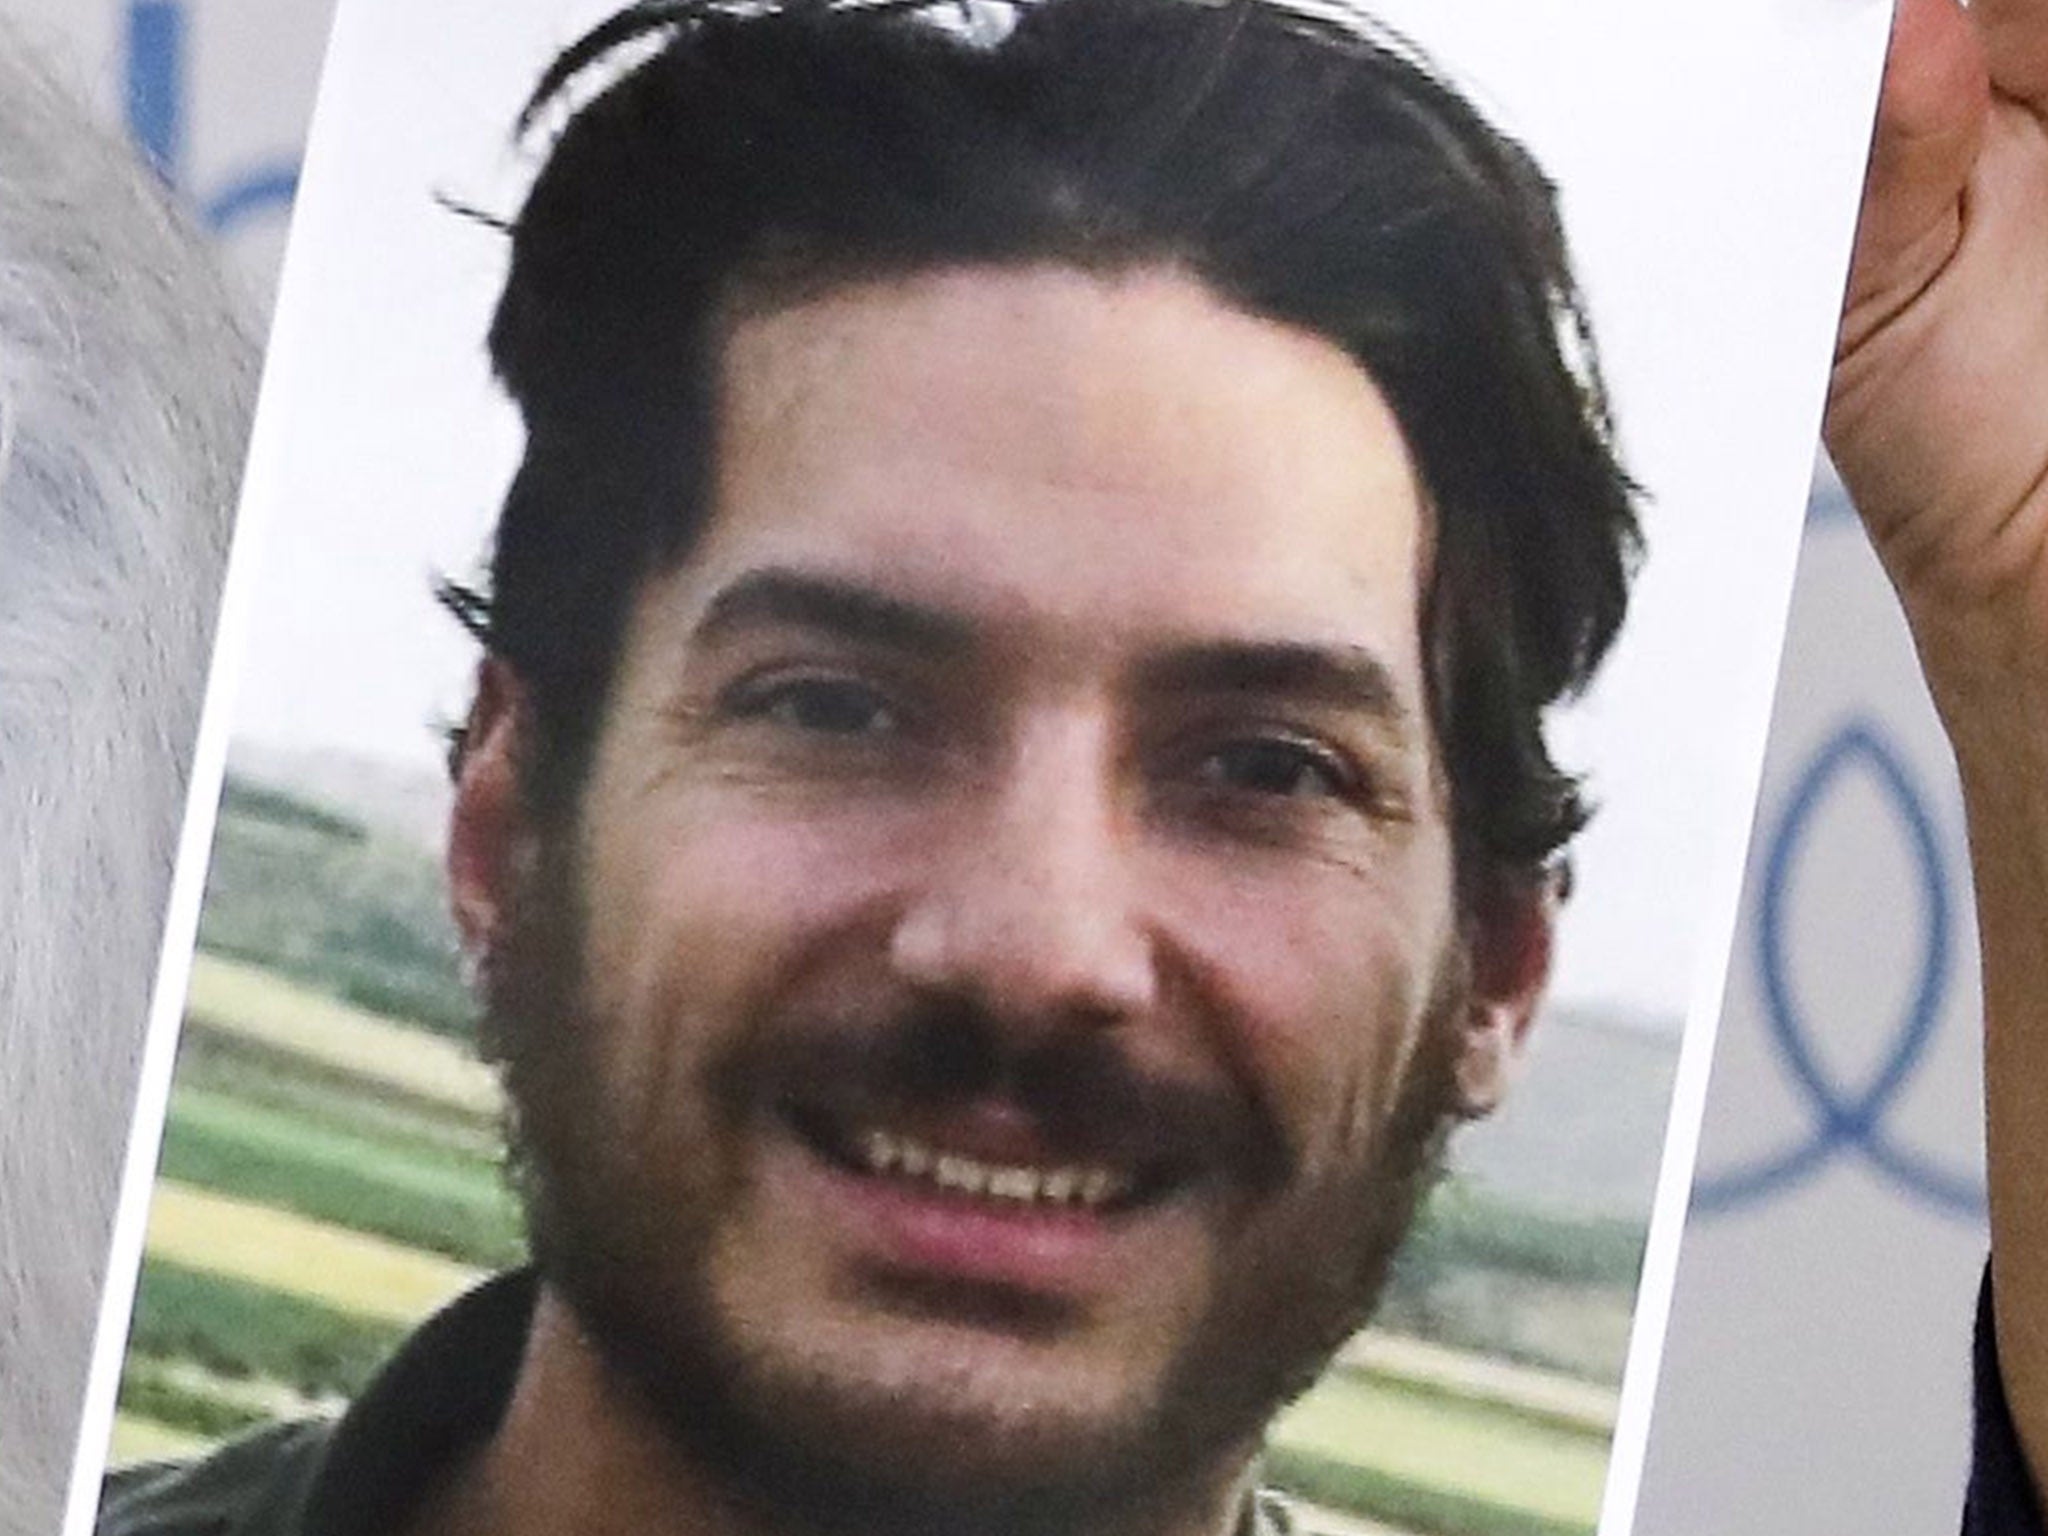 US journalist Austin Tice, who was kidnapped in Syria in 2012